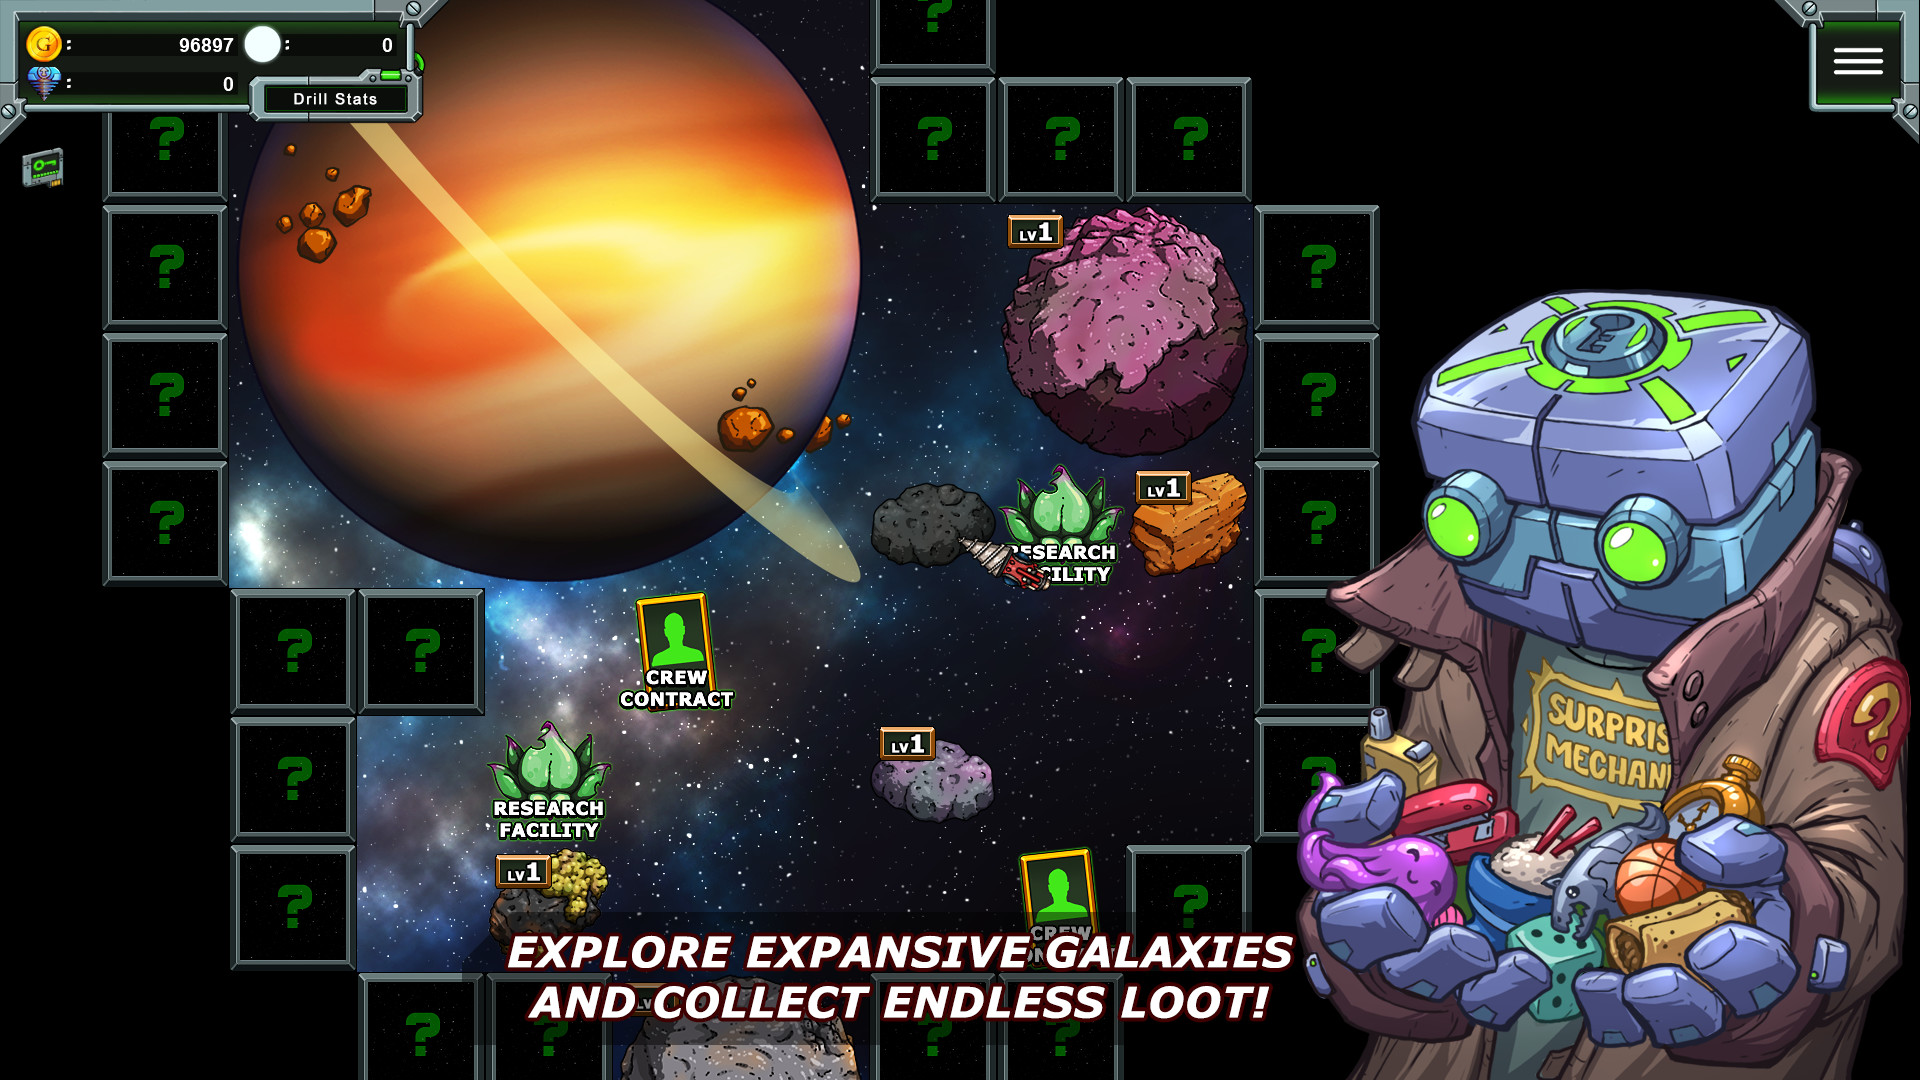 Cloud Miners is an upcoming 2D co-op space mining and exploration game